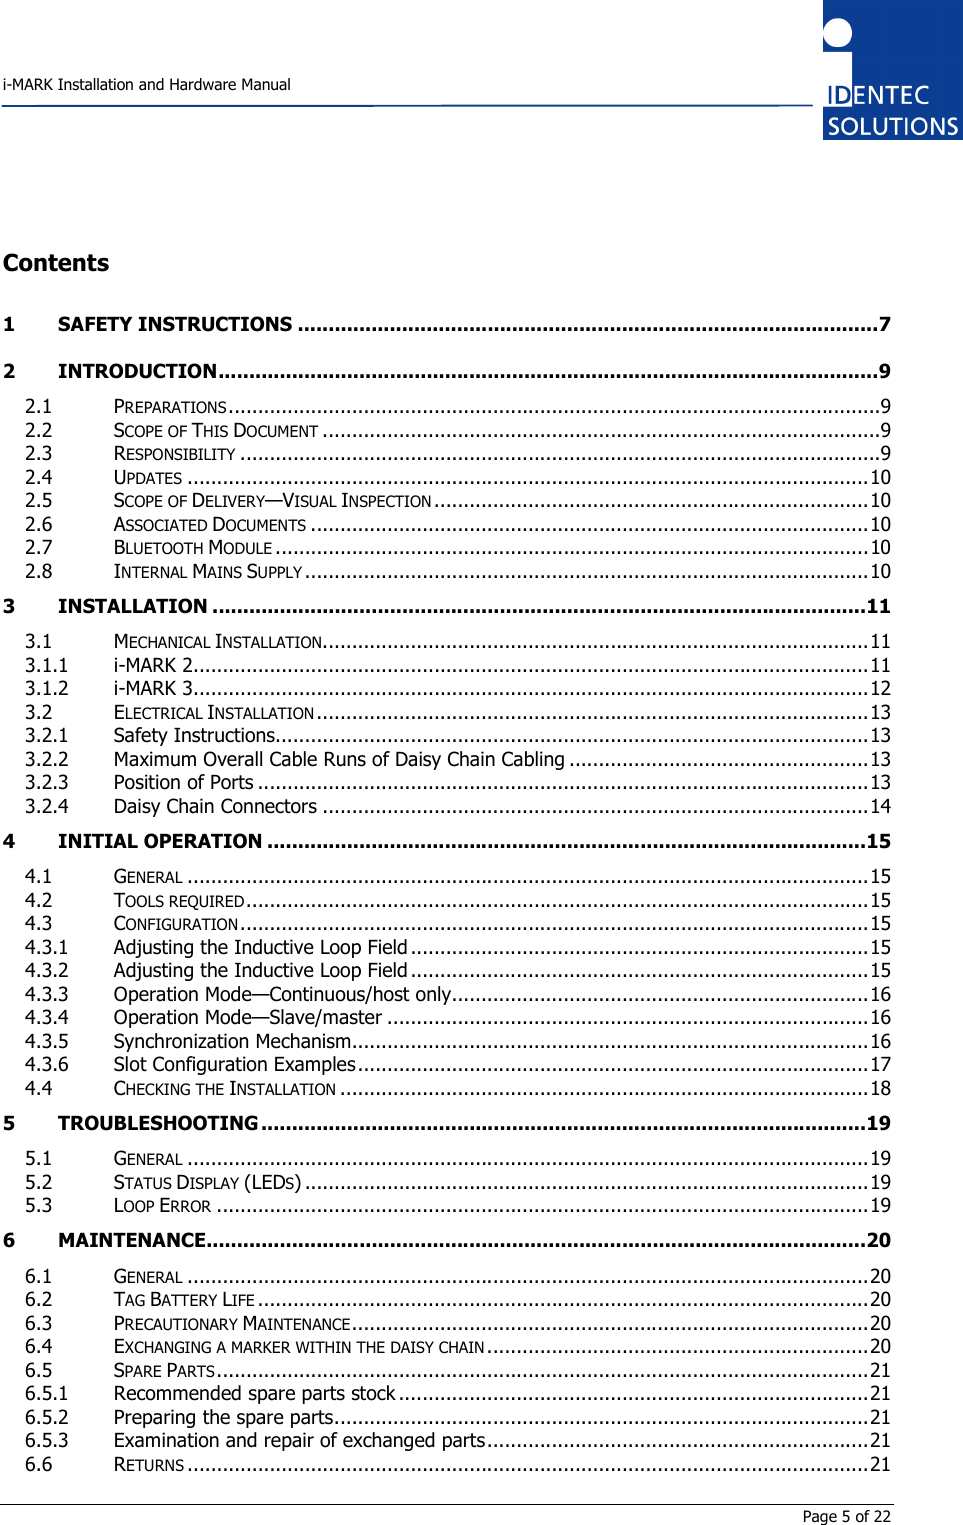    i-MARK Installation and Hardware Manual       Page 5 of 22 Contents 1 SAFETY INSTRUCTIONS ...............................................................................................7 2 INTRODUCTION............................................................................................................9 2.1 PREPARATIONS...............................................................................................................9 2.2 SCOPE OF THIS DOCUMENT...............................................................................................9 2.3 RESPONSIBILITY.............................................................................................................9 2.4 UPDATES....................................................................................................................10 2.5 SCOPE OF DELIVERY—VISUAL INSPECTION..........................................................................10 2.6 ASSOCIATED DOCUMENTS...............................................................................................10 2.7 BLUETOOTH MODULE.....................................................................................................10 2.8 INTERNAL MAINS SUPPLY................................................................................................10 3 INSTALLATION ...........................................................................................................11 3.1 MECHANICAL INSTALLATION.............................................................................................11 3.1.1 i-MARK 2...................................................................................................................11 3.1.2 i-MARK 3...................................................................................................................12 3.2 ELECTRICAL INSTALLATION..............................................................................................13 3.2.1 Safety Instructions.....................................................................................................13 3.2.2 Maximum Overall Cable Runs of Daisy Chain Cabling ...................................................13 3.2.3 Position of Ports ........................................................................................................13 3.2.4 Daisy Chain Connectors .............................................................................................14 4 INITIAL OPERATION ..................................................................................................15 4.1 GENERAL....................................................................................................................15 4.2 TOOLS REQUIRED..........................................................................................................15 4.3 CONFIGURATION...........................................................................................................15 4.3.1 Adjusting the Inductive Loop Field ..............................................................................15 4.3.2 Adjusting the Inductive Loop Field ..............................................................................15 4.3.3 Operation Mode—Continuous/host only.......................................................................16 4.3.4 Operation Mode—Slave/master ..................................................................................16 4.3.5 Synchronization Mechanism........................................................................................16 4.3.6 Slot Configuration Examples.......................................................................................17 4.4 CHECKING THE INSTALLATION..........................................................................................18 5 TROUBLESHOOTING ...................................................................................................19 5.1 GENERAL....................................................................................................................19 5.2 STATUS DISPLAY (LEDS) ................................................................................................19 5.3 LOOP ERROR...............................................................................................................19 6 MAINTENANCE............................................................................................................20 6.1 GENERAL....................................................................................................................20 6.2 TAG BATTERY LIFE........................................................................................................20 6.3 PRECAUTIONARY MAINTENANCE........................................................................................20 6.4 EXCHANGING A MARKER WITHIN THE DAISY CHAIN.................................................................20 6.5 SPARE PARTS...............................................................................................................21 6.5.1 Recommended spare parts stock ................................................................................21 6.5.2 Preparing the spare parts...........................................................................................21 6.5.3 Examination and repair of exchanged parts.................................................................21 6.6 RETURNS....................................................................................................................21 